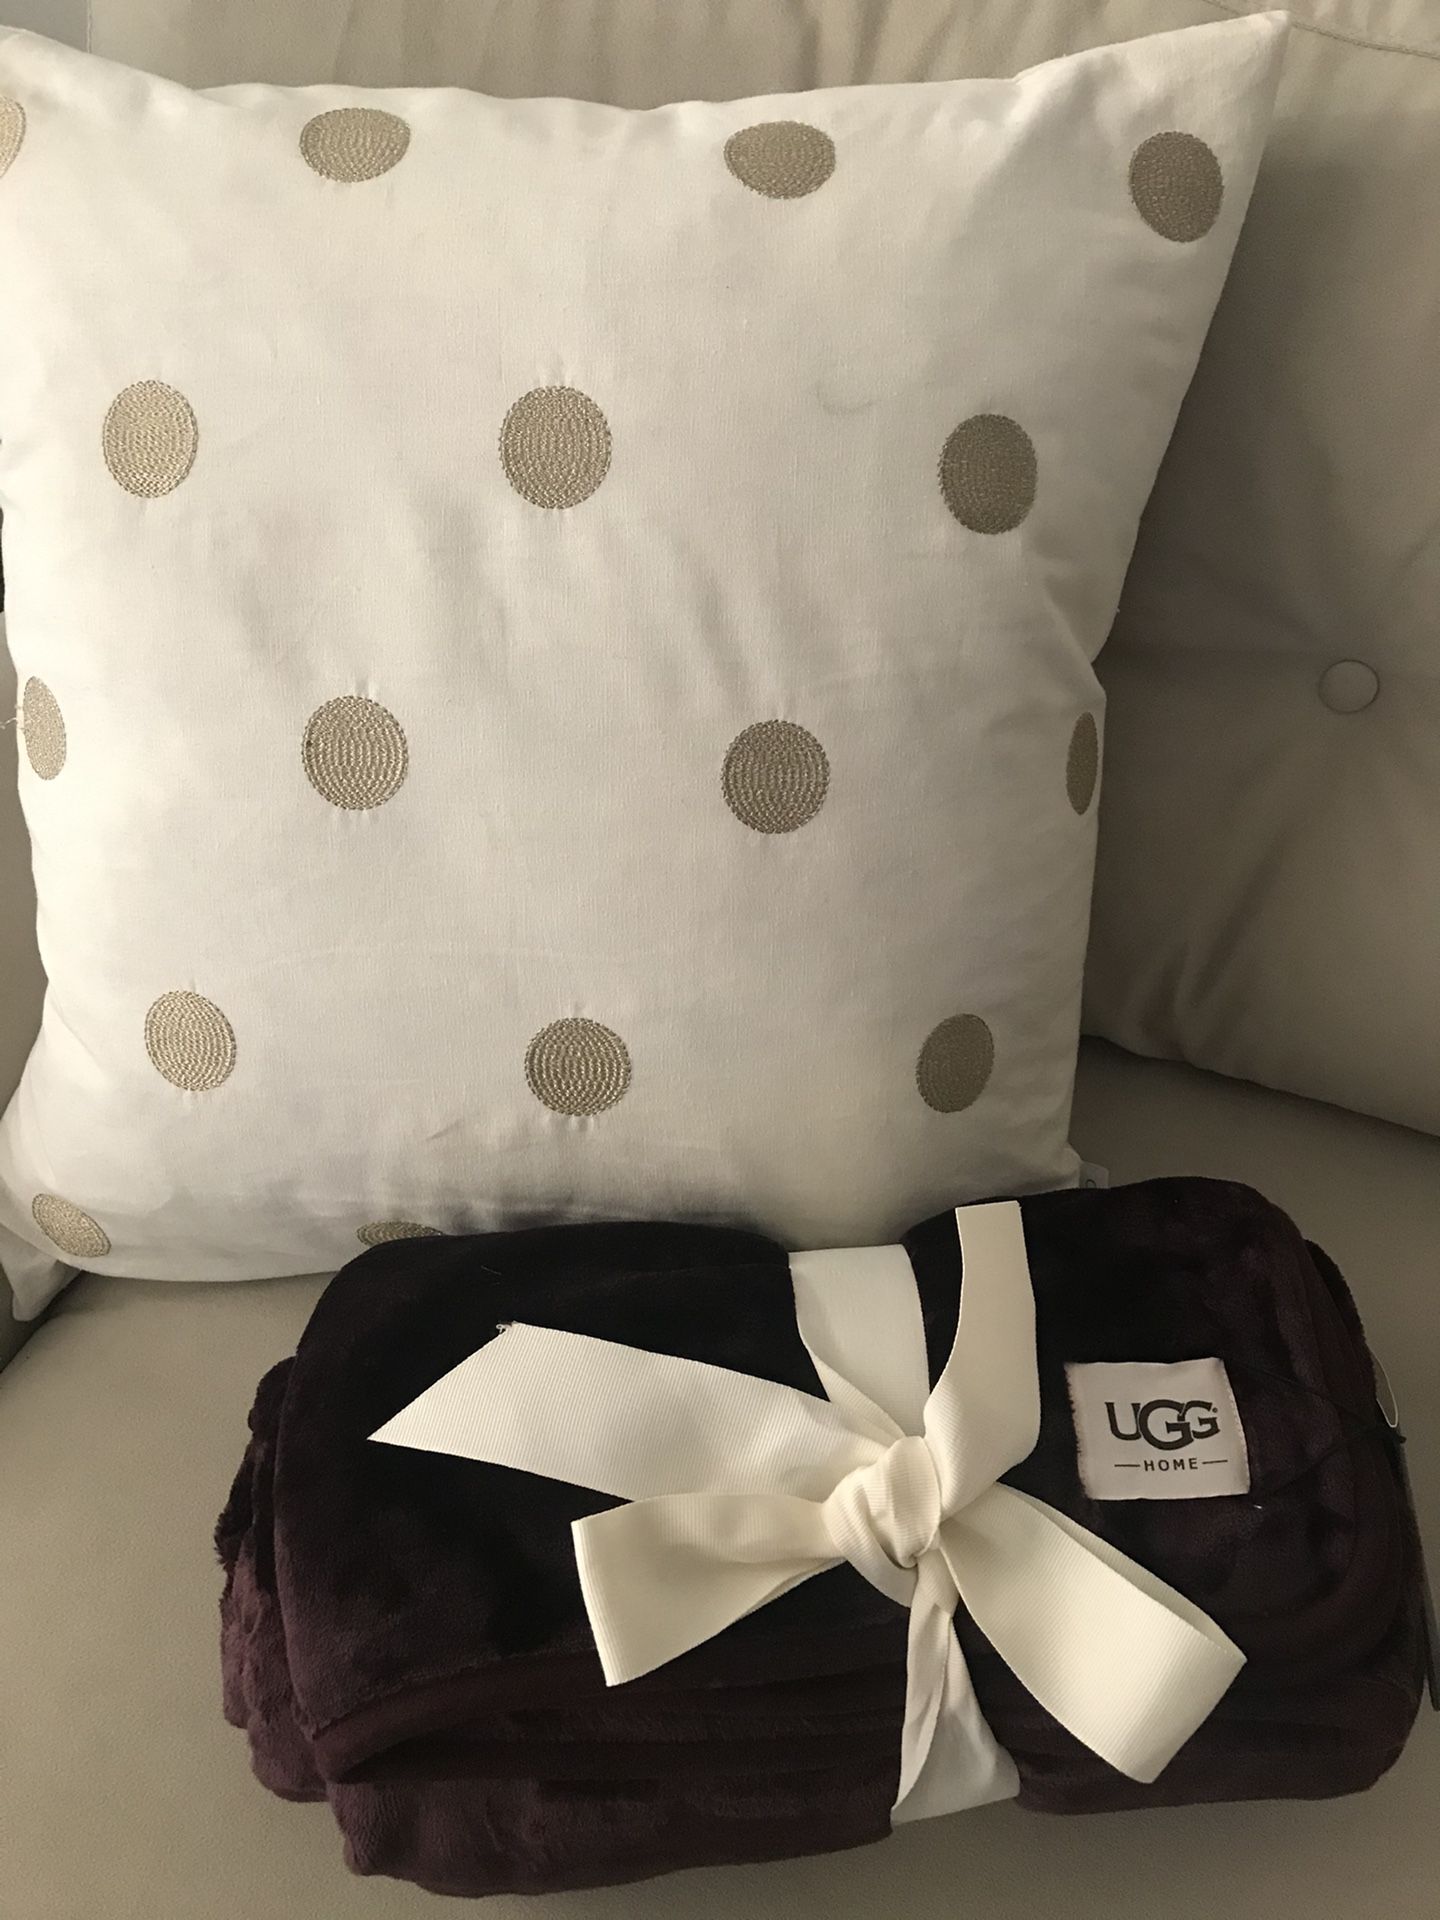 New Calvin Klein Pillow and Ugg Throw Blanket